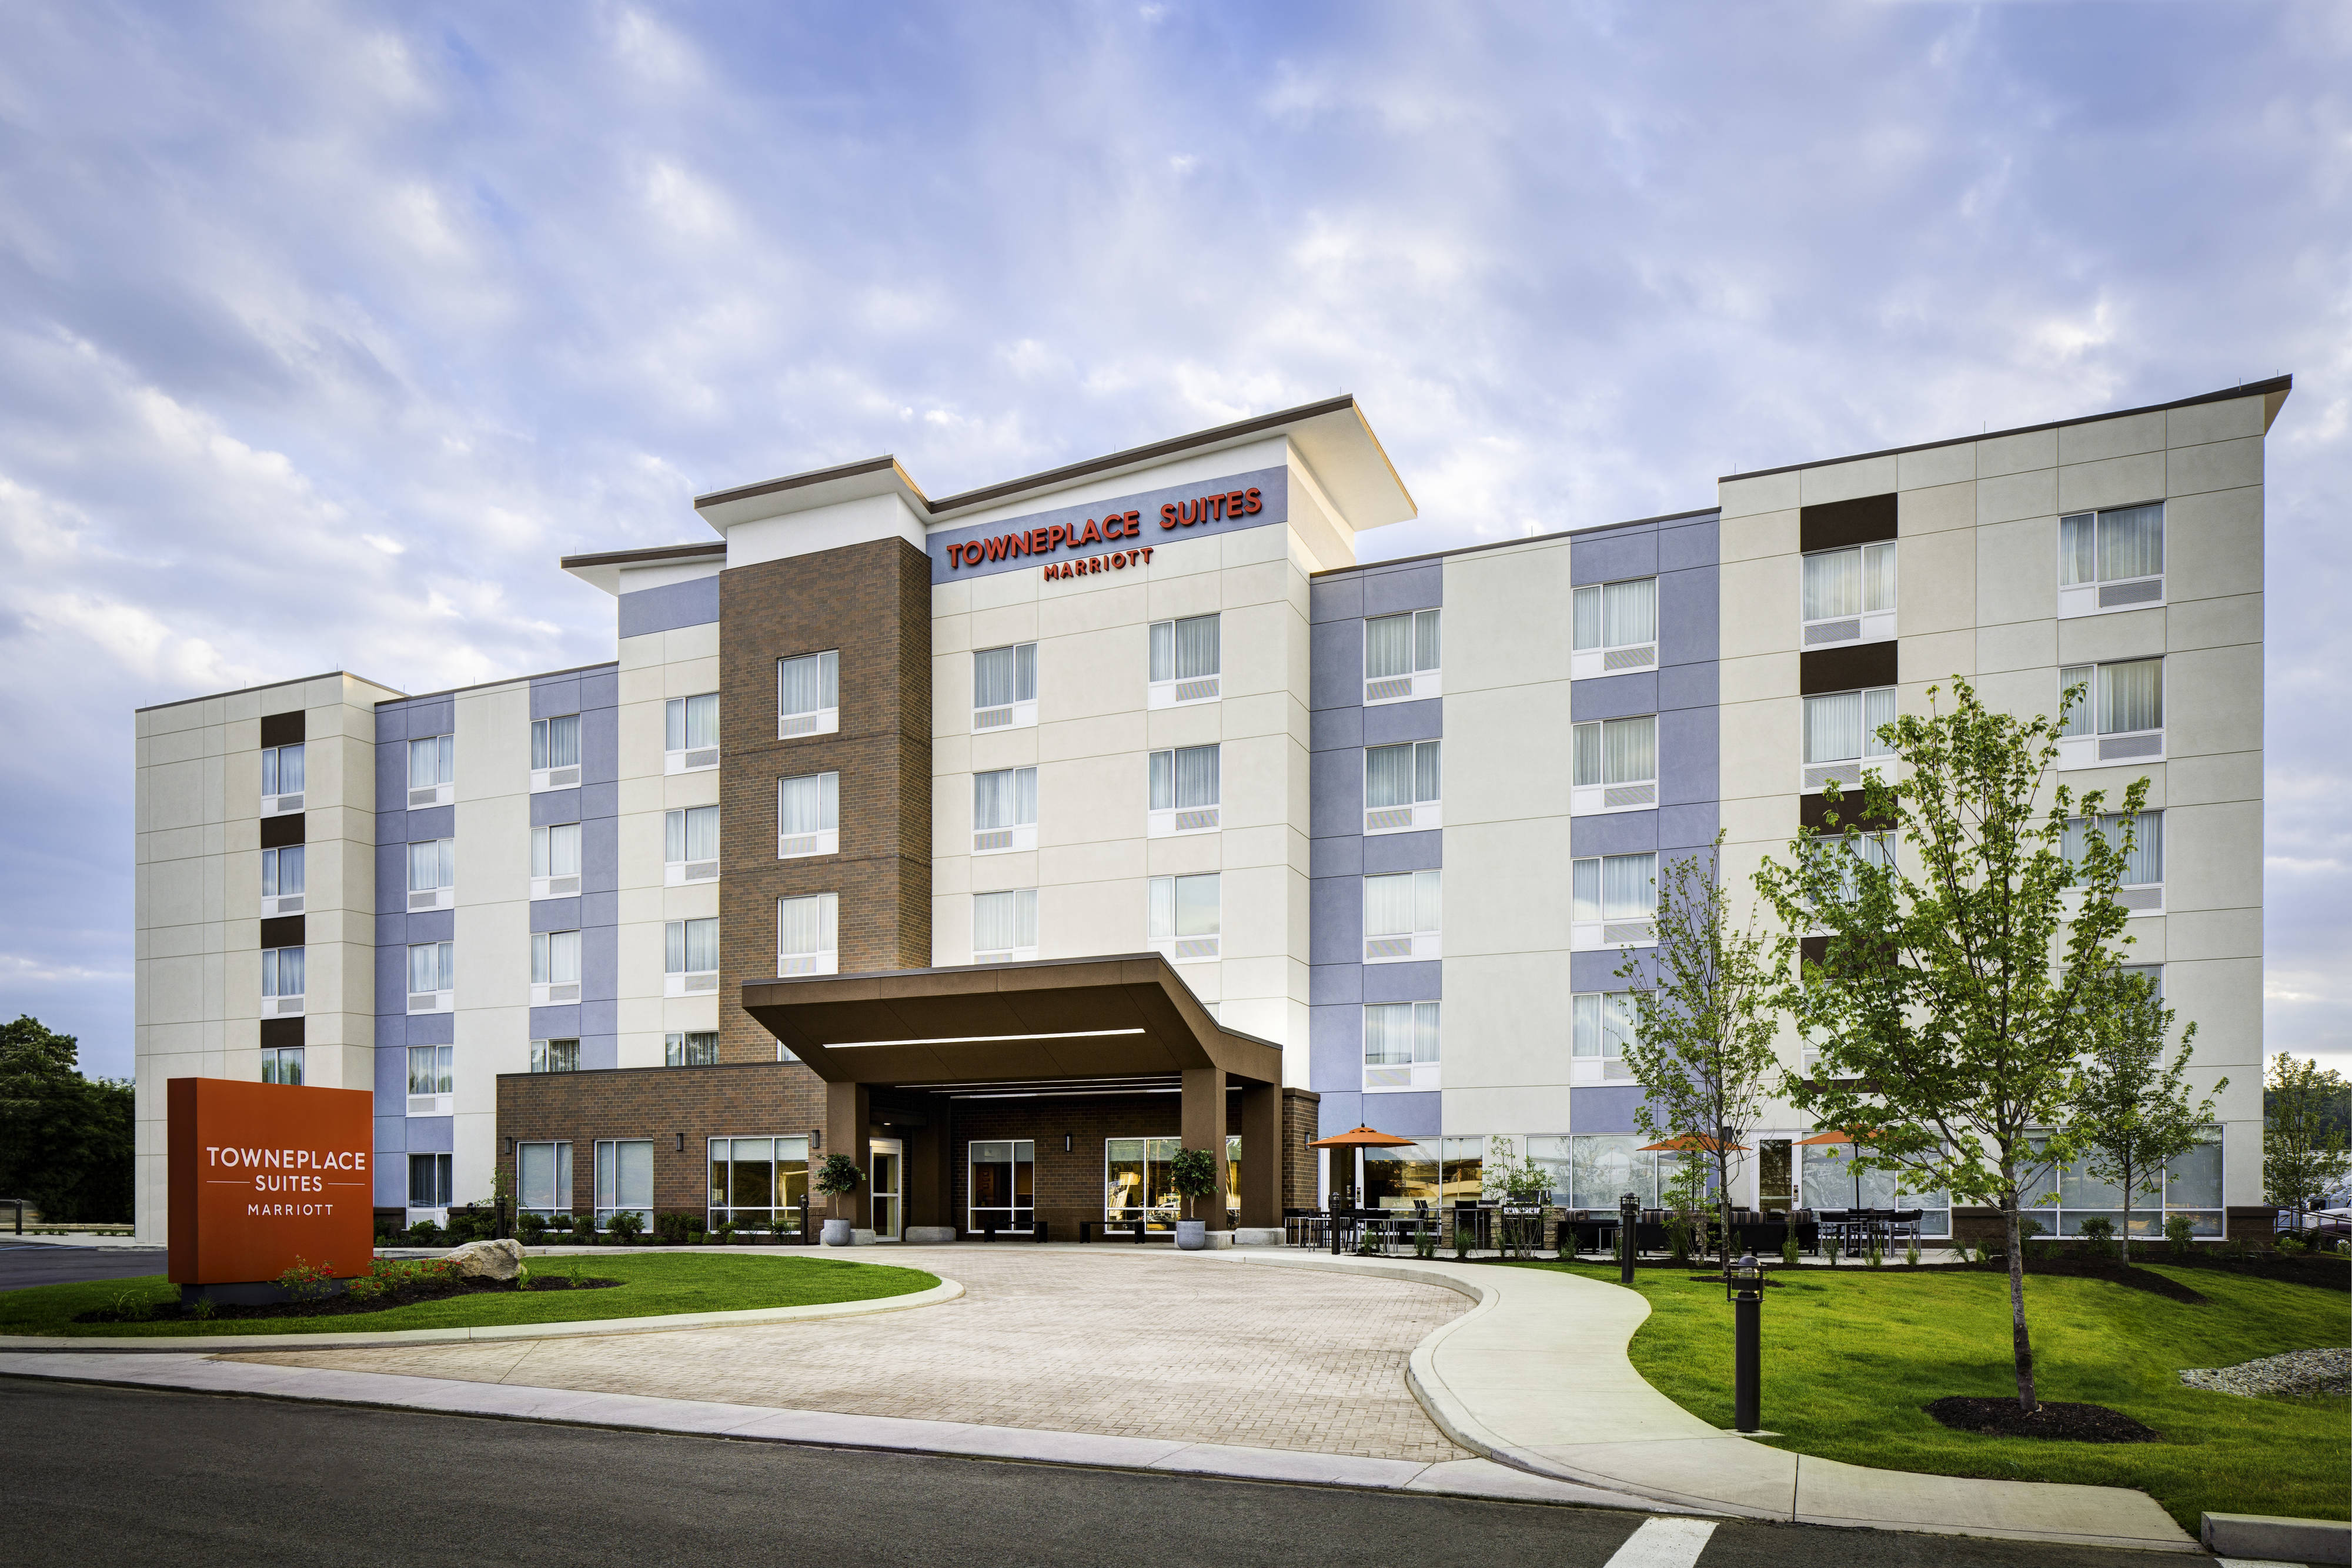 Photo of TownePlace Suites Mobile Saraland, Saraland, AL